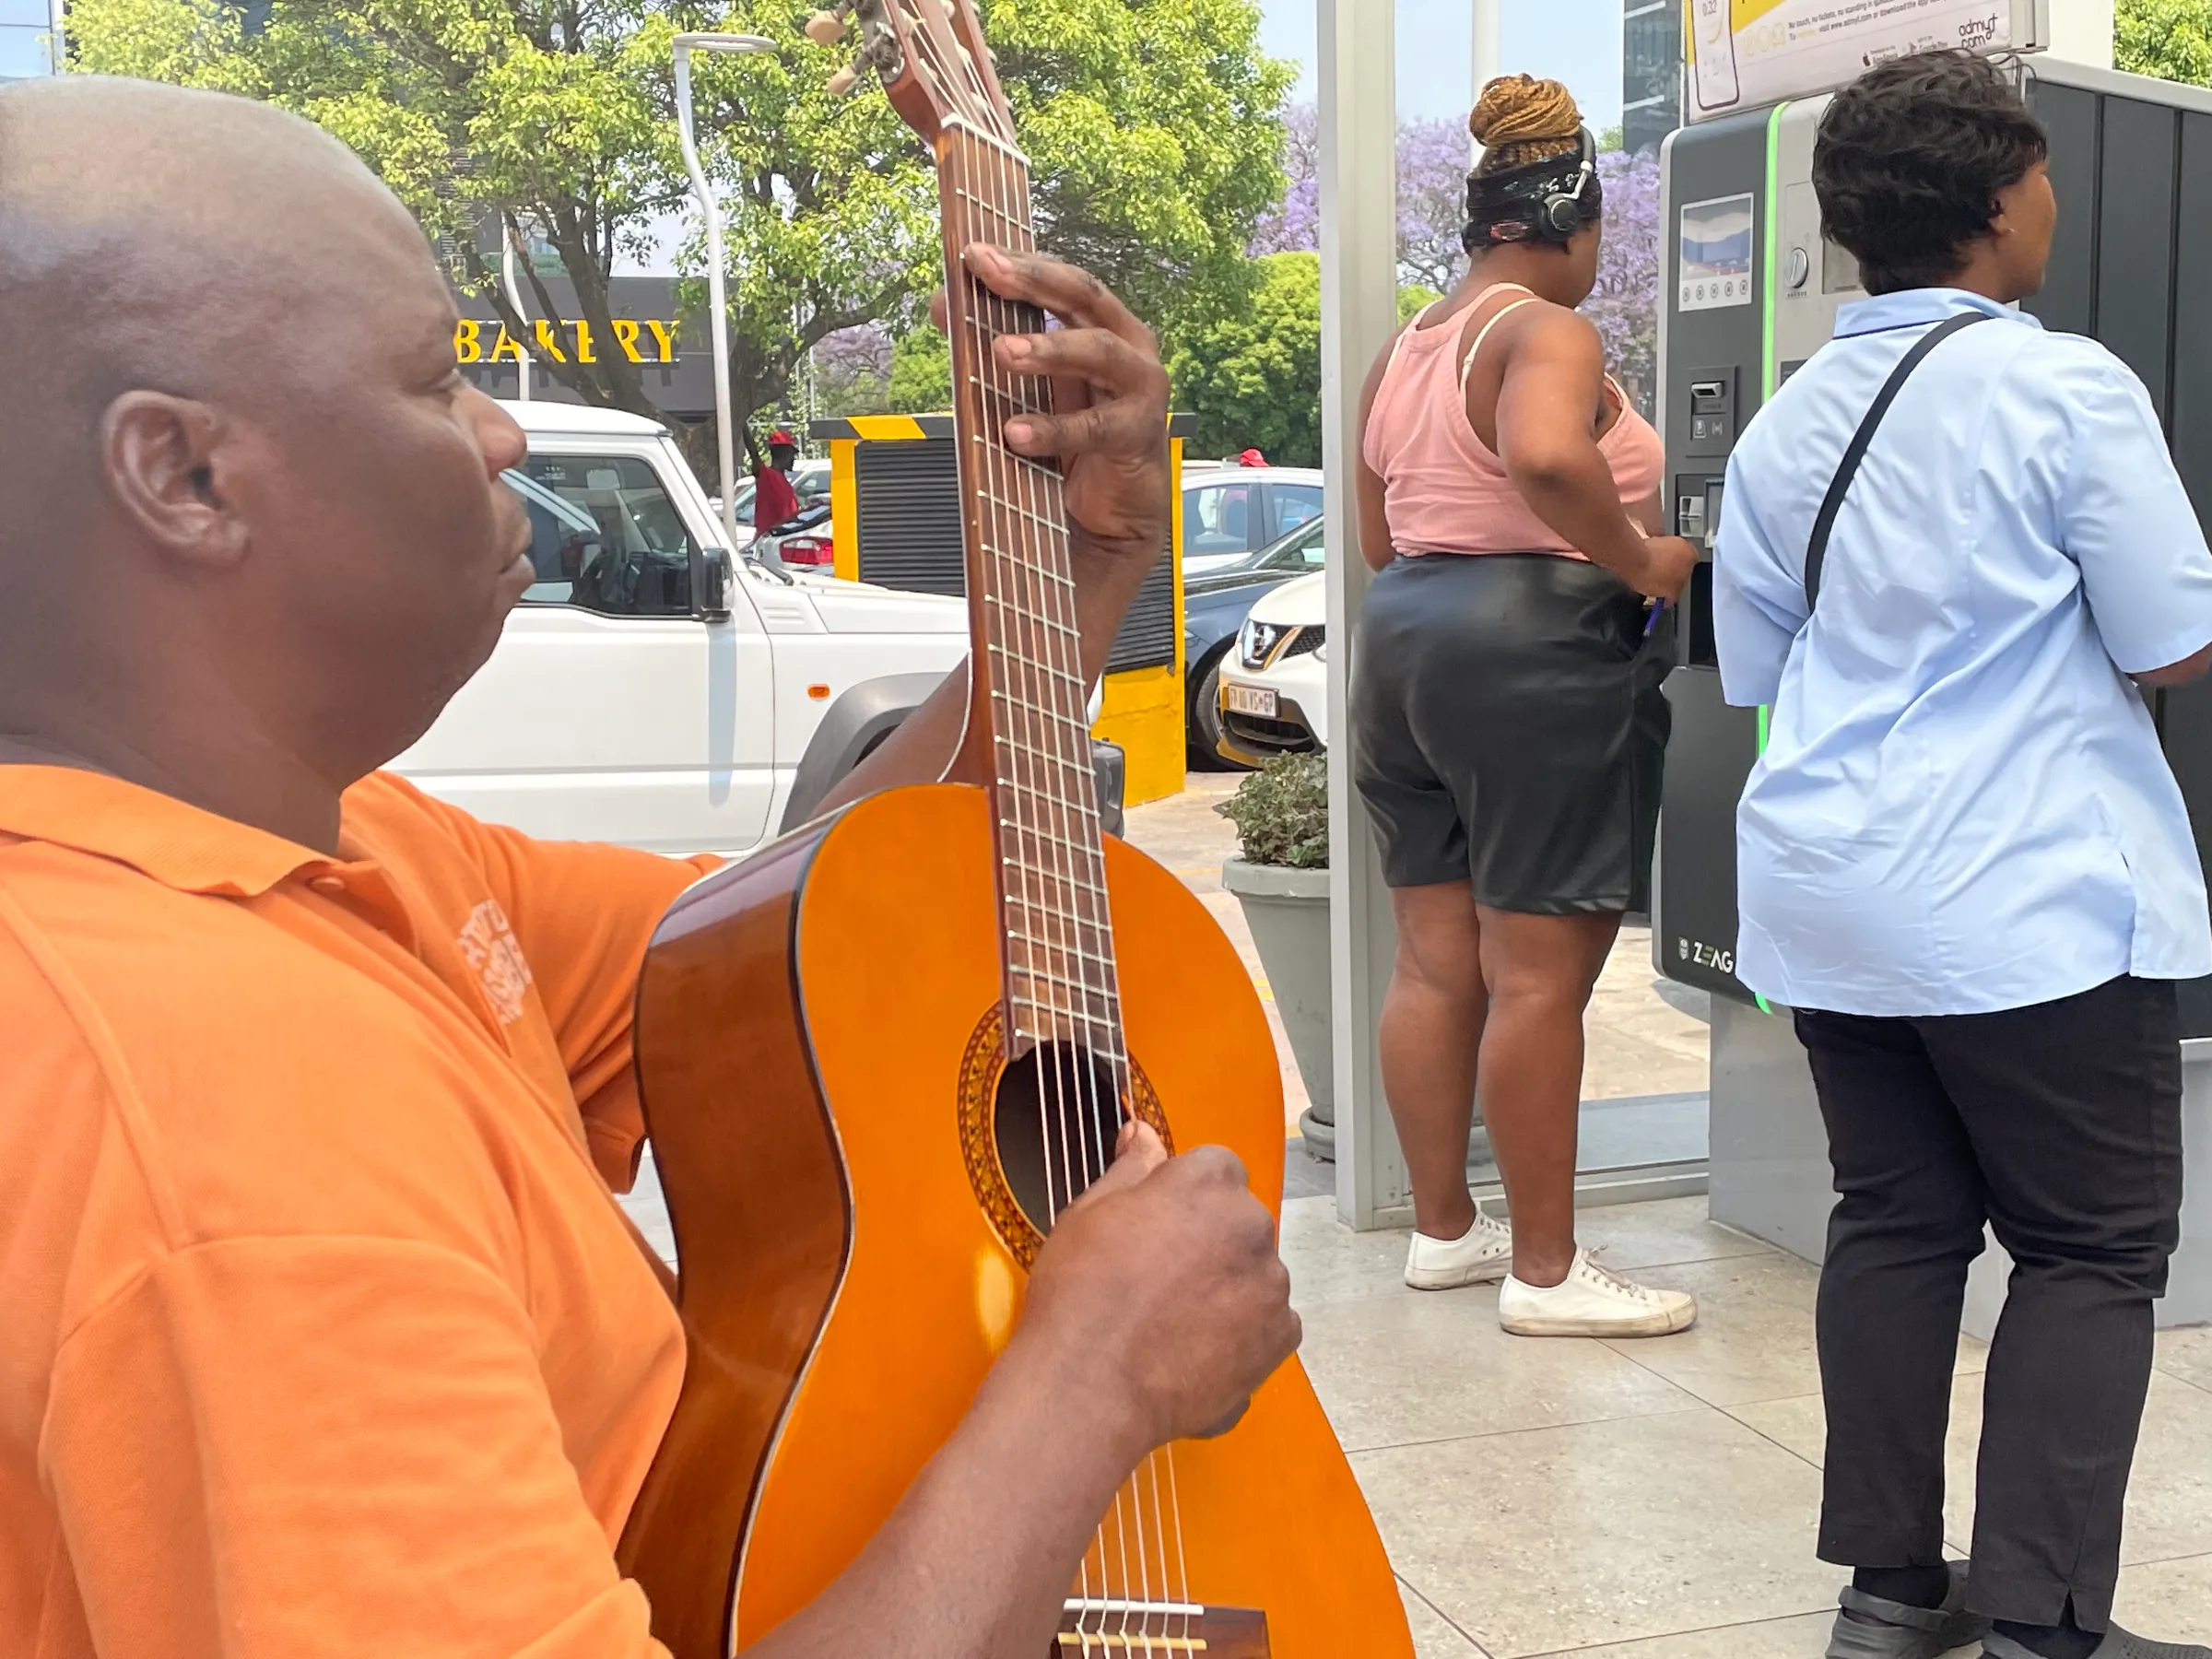 Thomas Nhassavele plays a guitar alongside a parking pay point in Rosebank Mall in Johannesburg, South Africa, October 7, 2022. Thomson Reuters Foundation/Kim Harrisberg